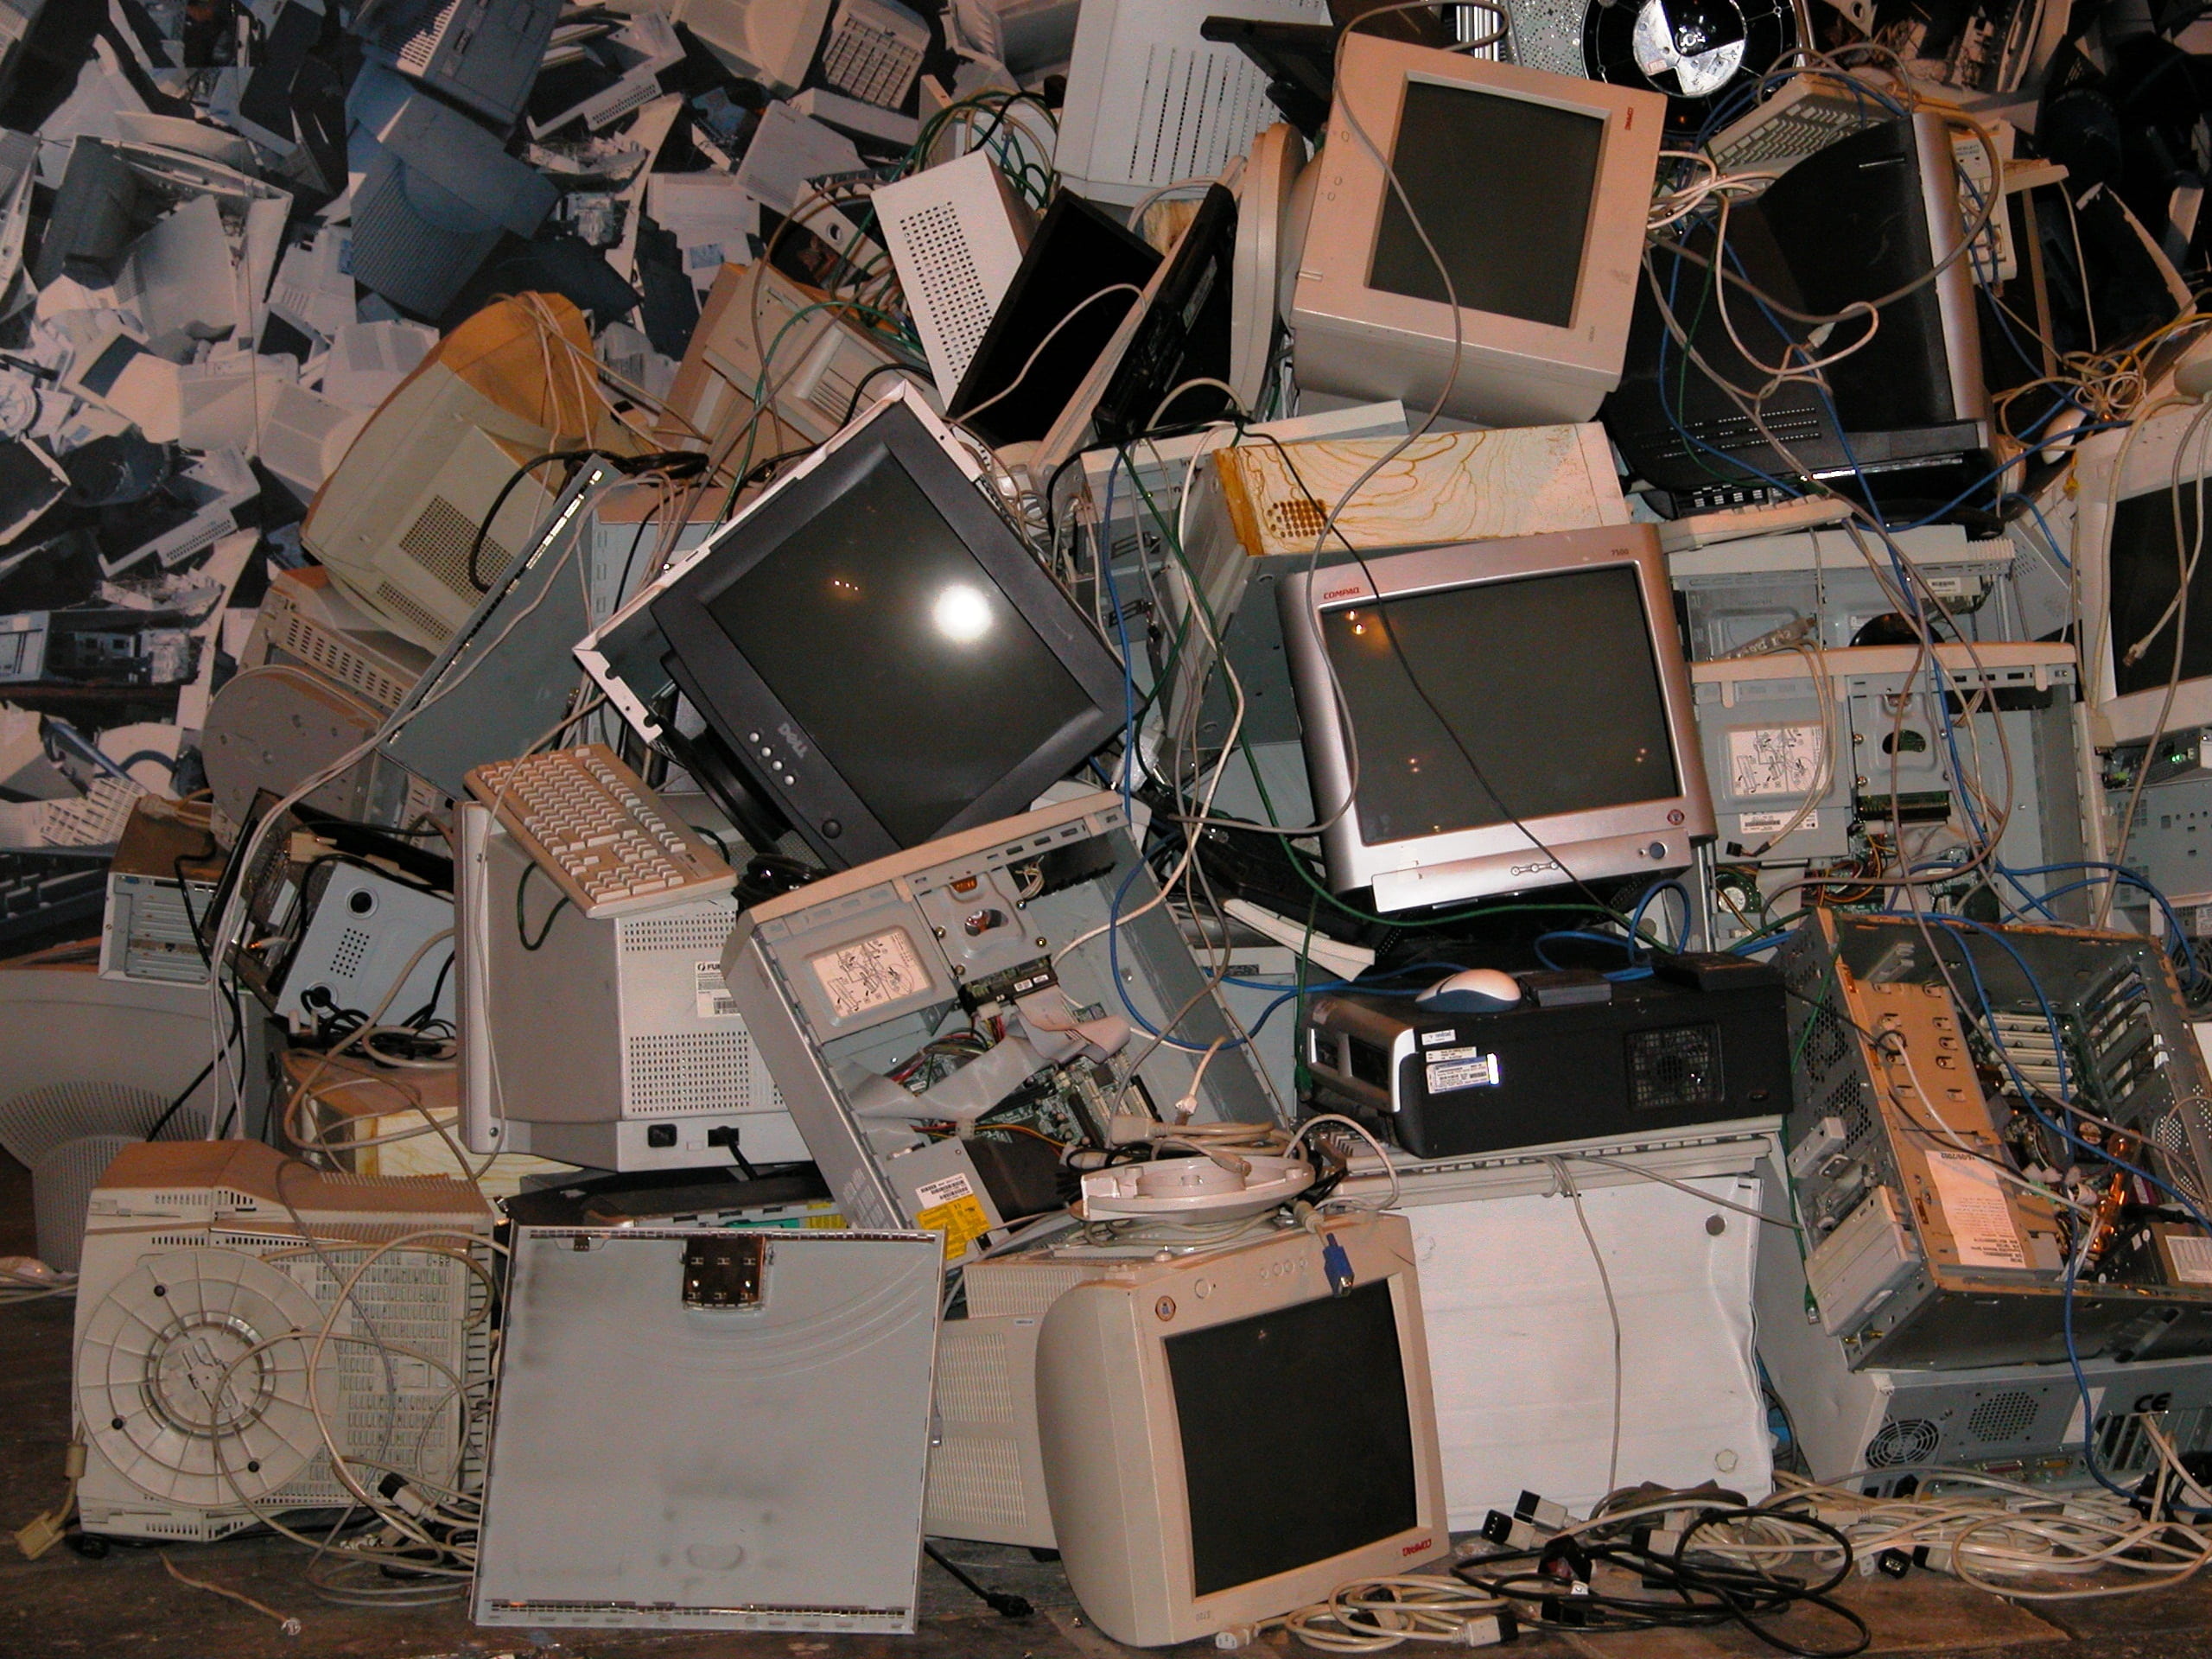 Pile of computer parts